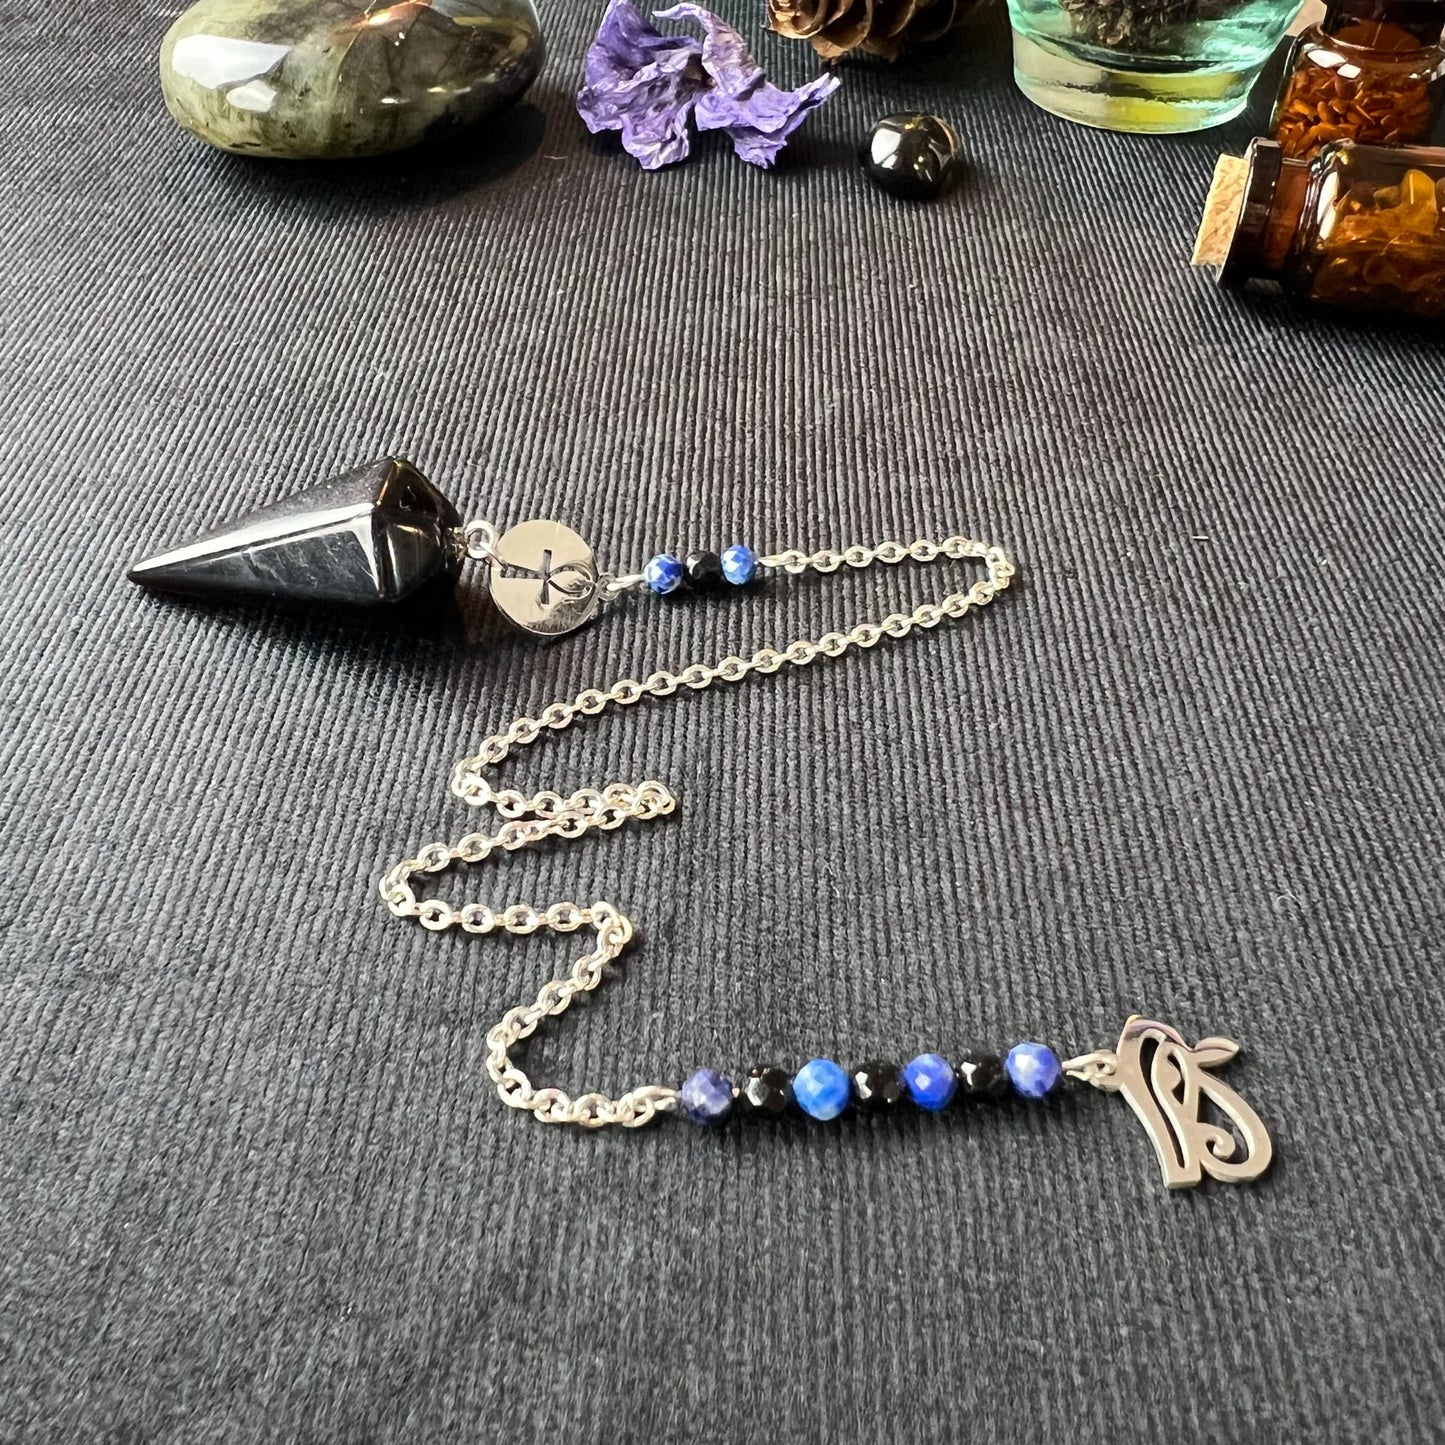 Stainless steel pendulum with obsidian, lapis lazuli, onyx, Eye of Horus and Ankh Baguette Magick